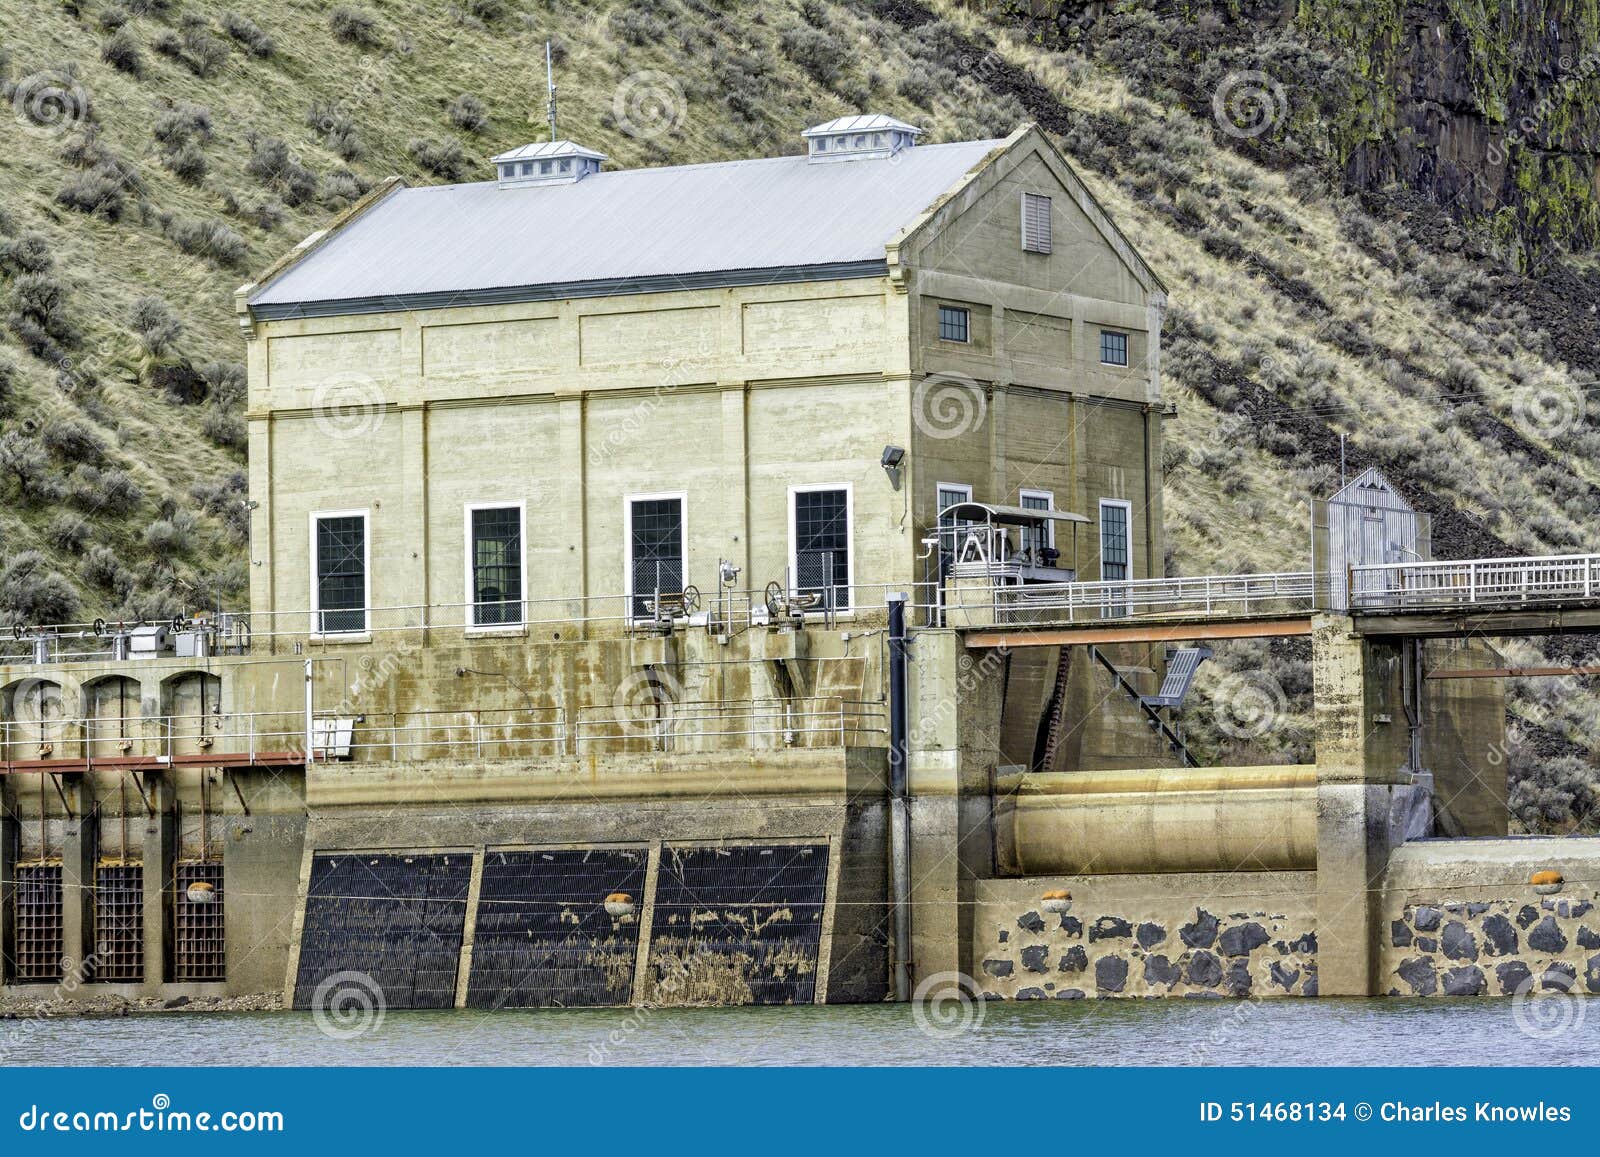 old building that is part of a diversion dam near boise